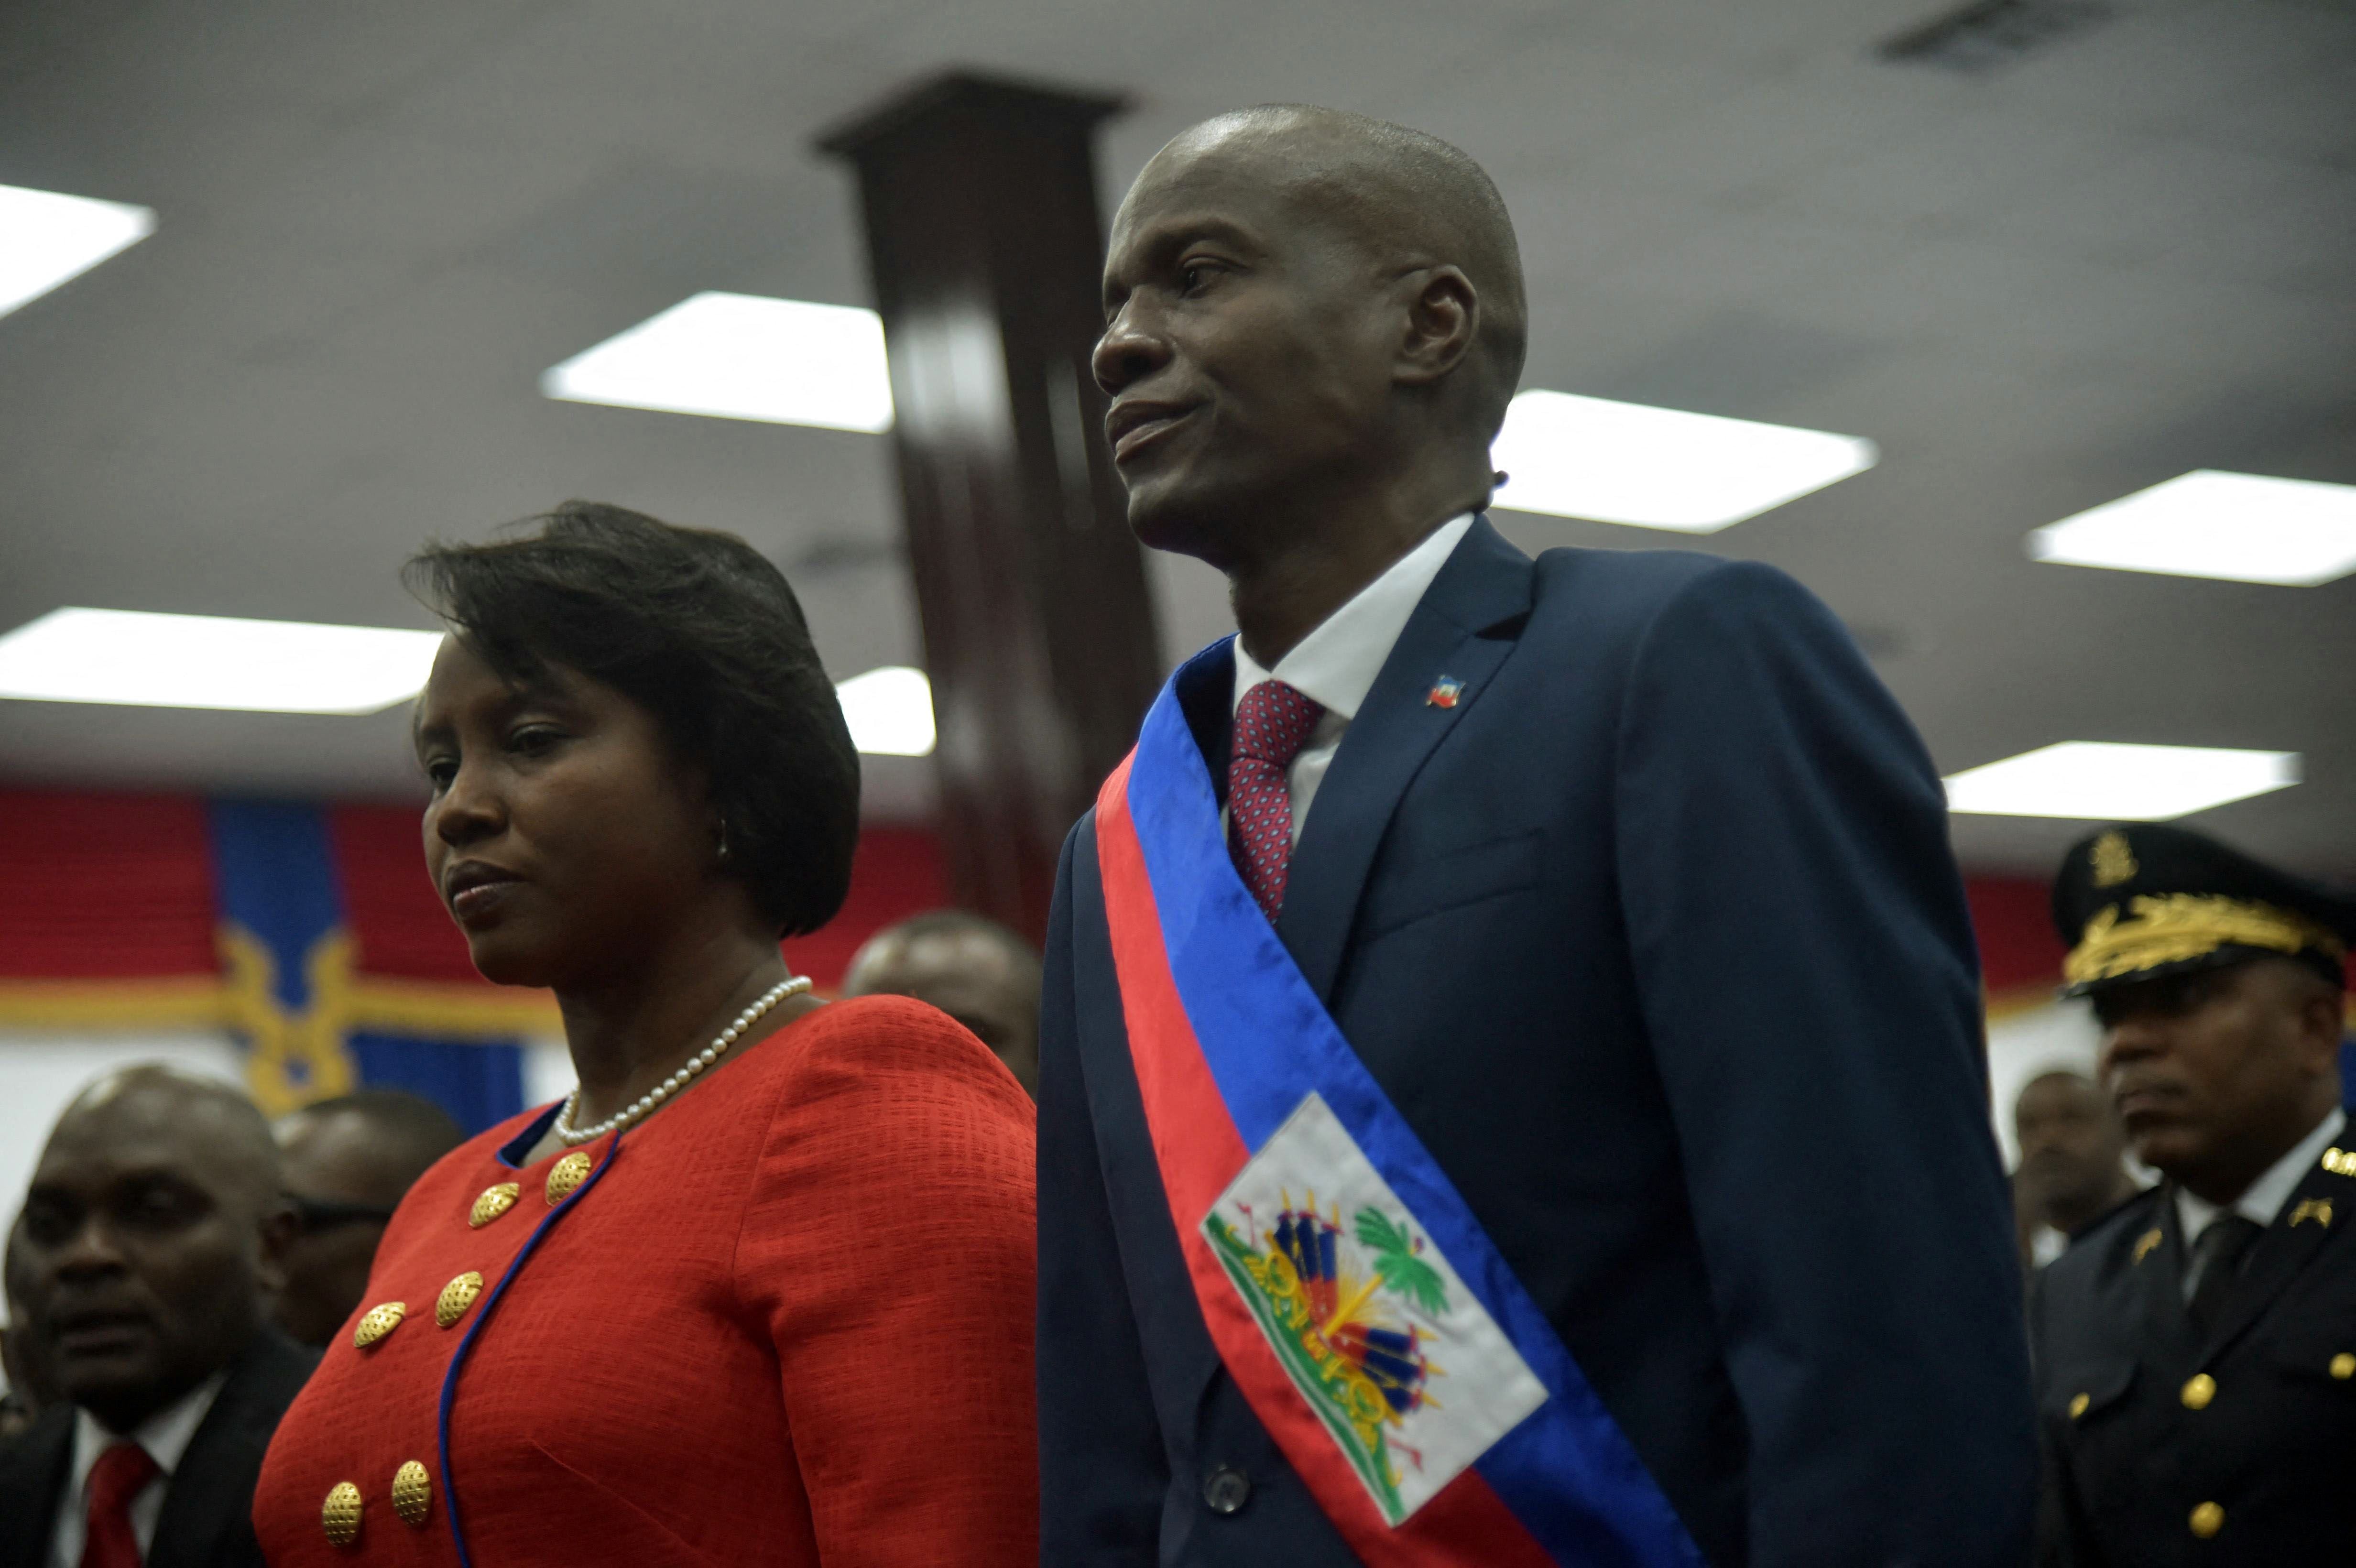 The new Haitian president, Jovenel Moise, with his wife Martine after receiving his sash during his inauguration, on February 7, 2017. (Photo by HECTOR RETAMAL / AFP).